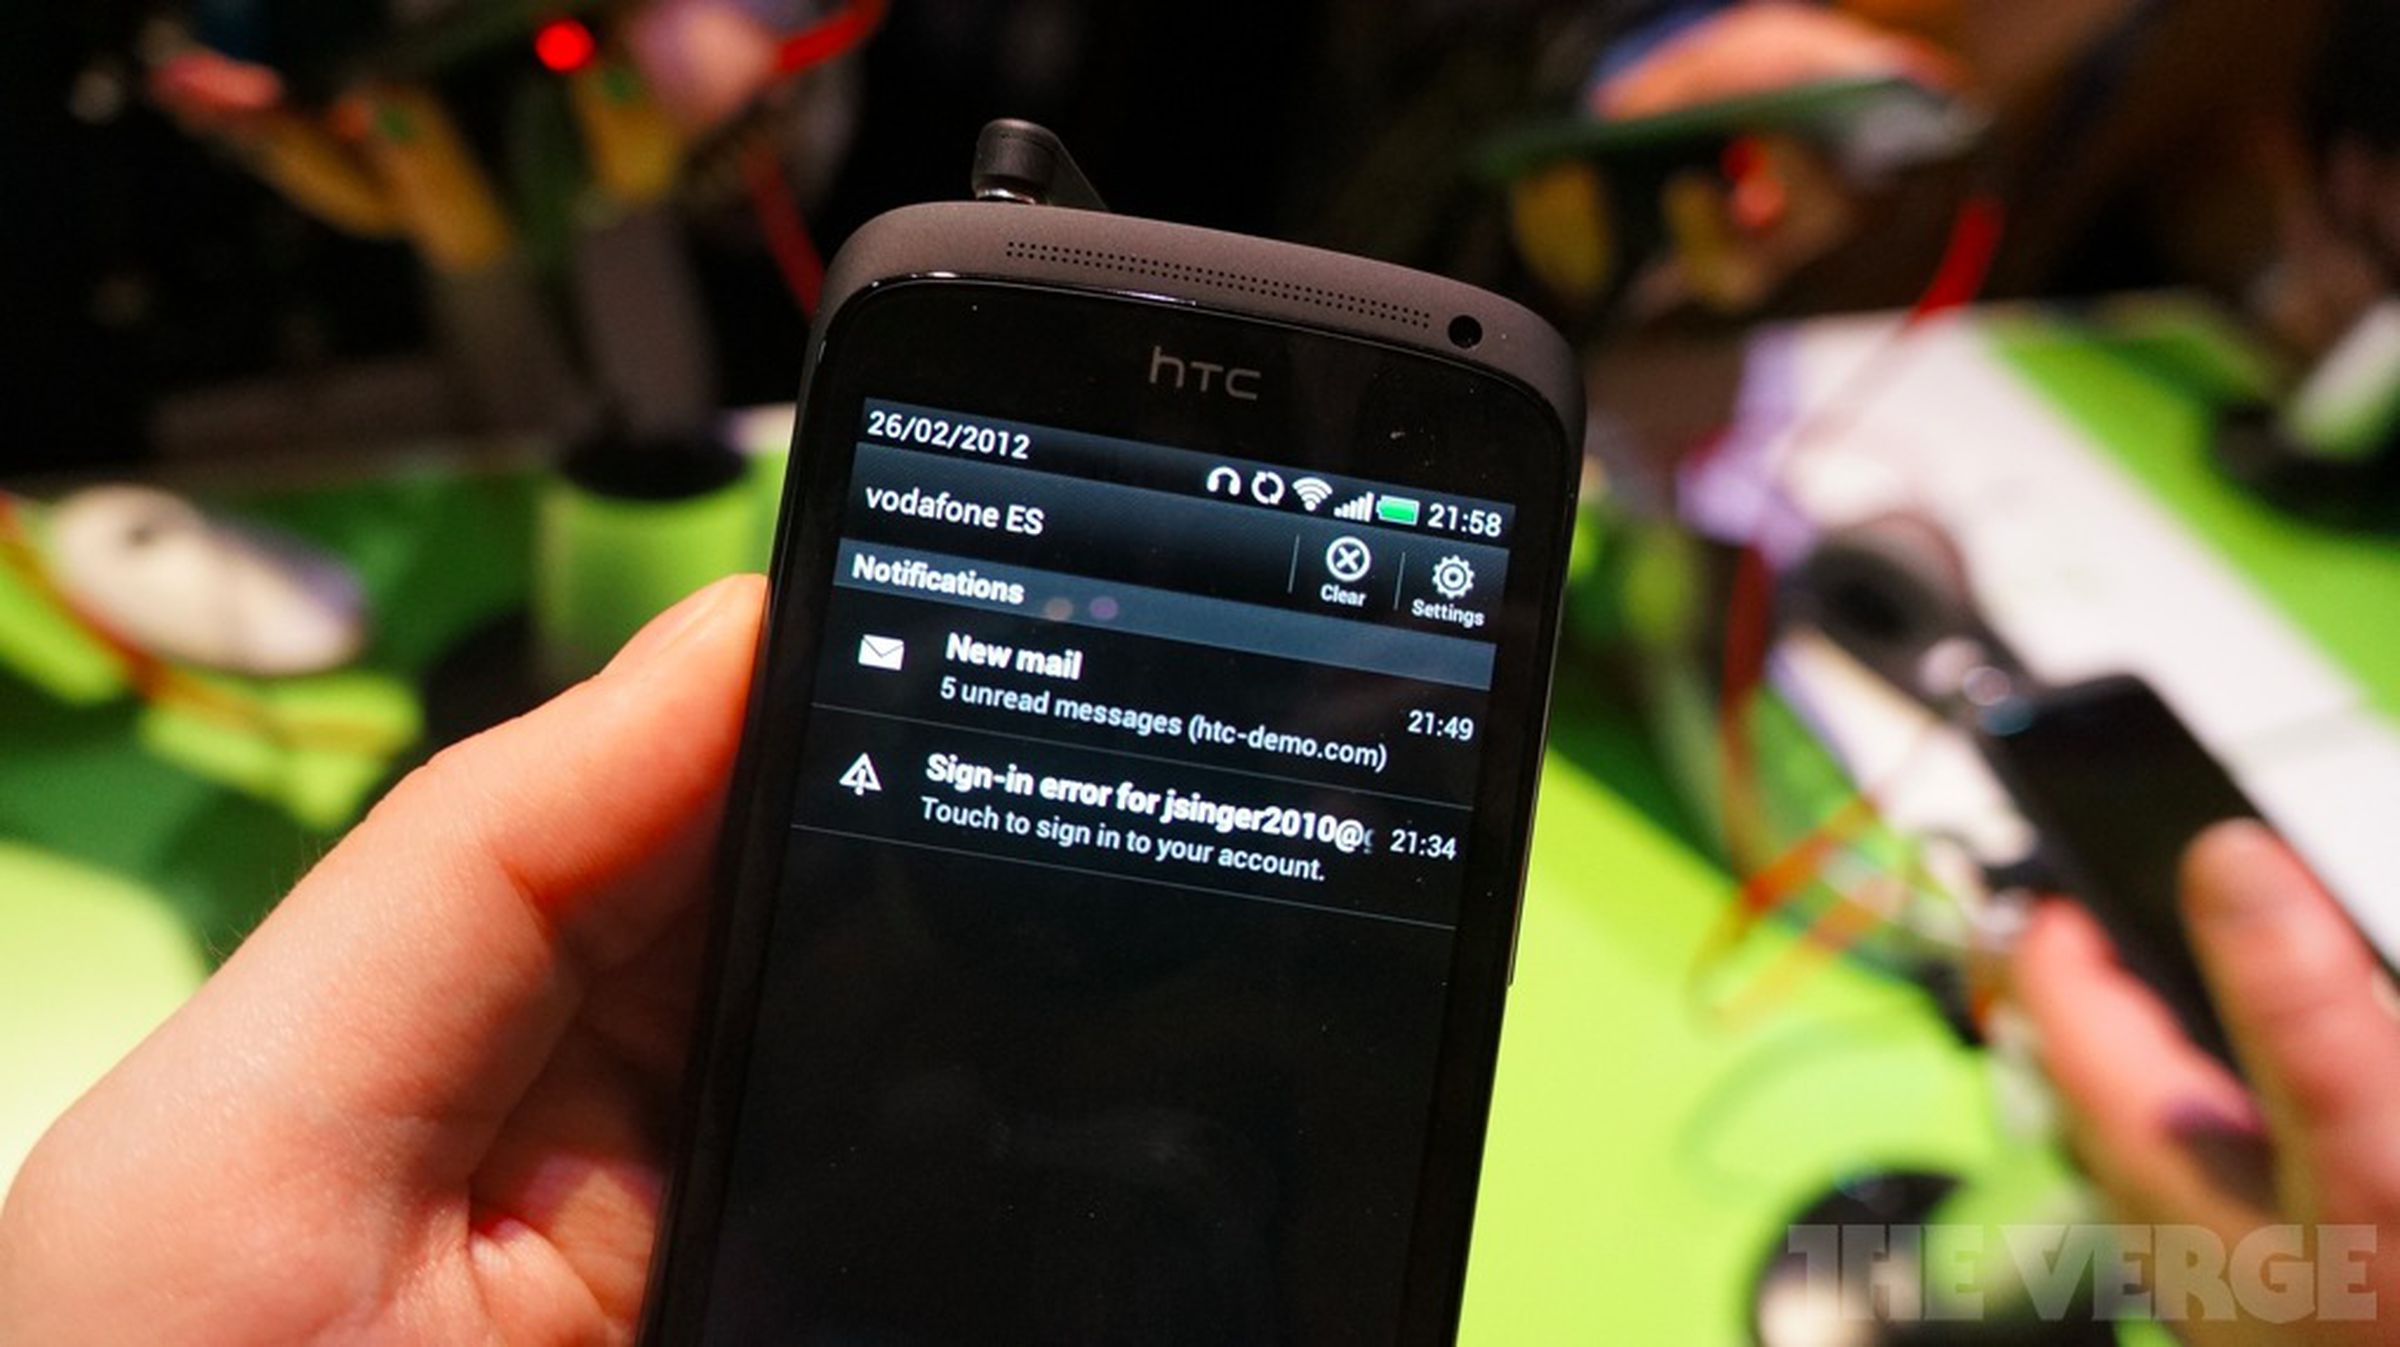 HTC One S hands-on photos